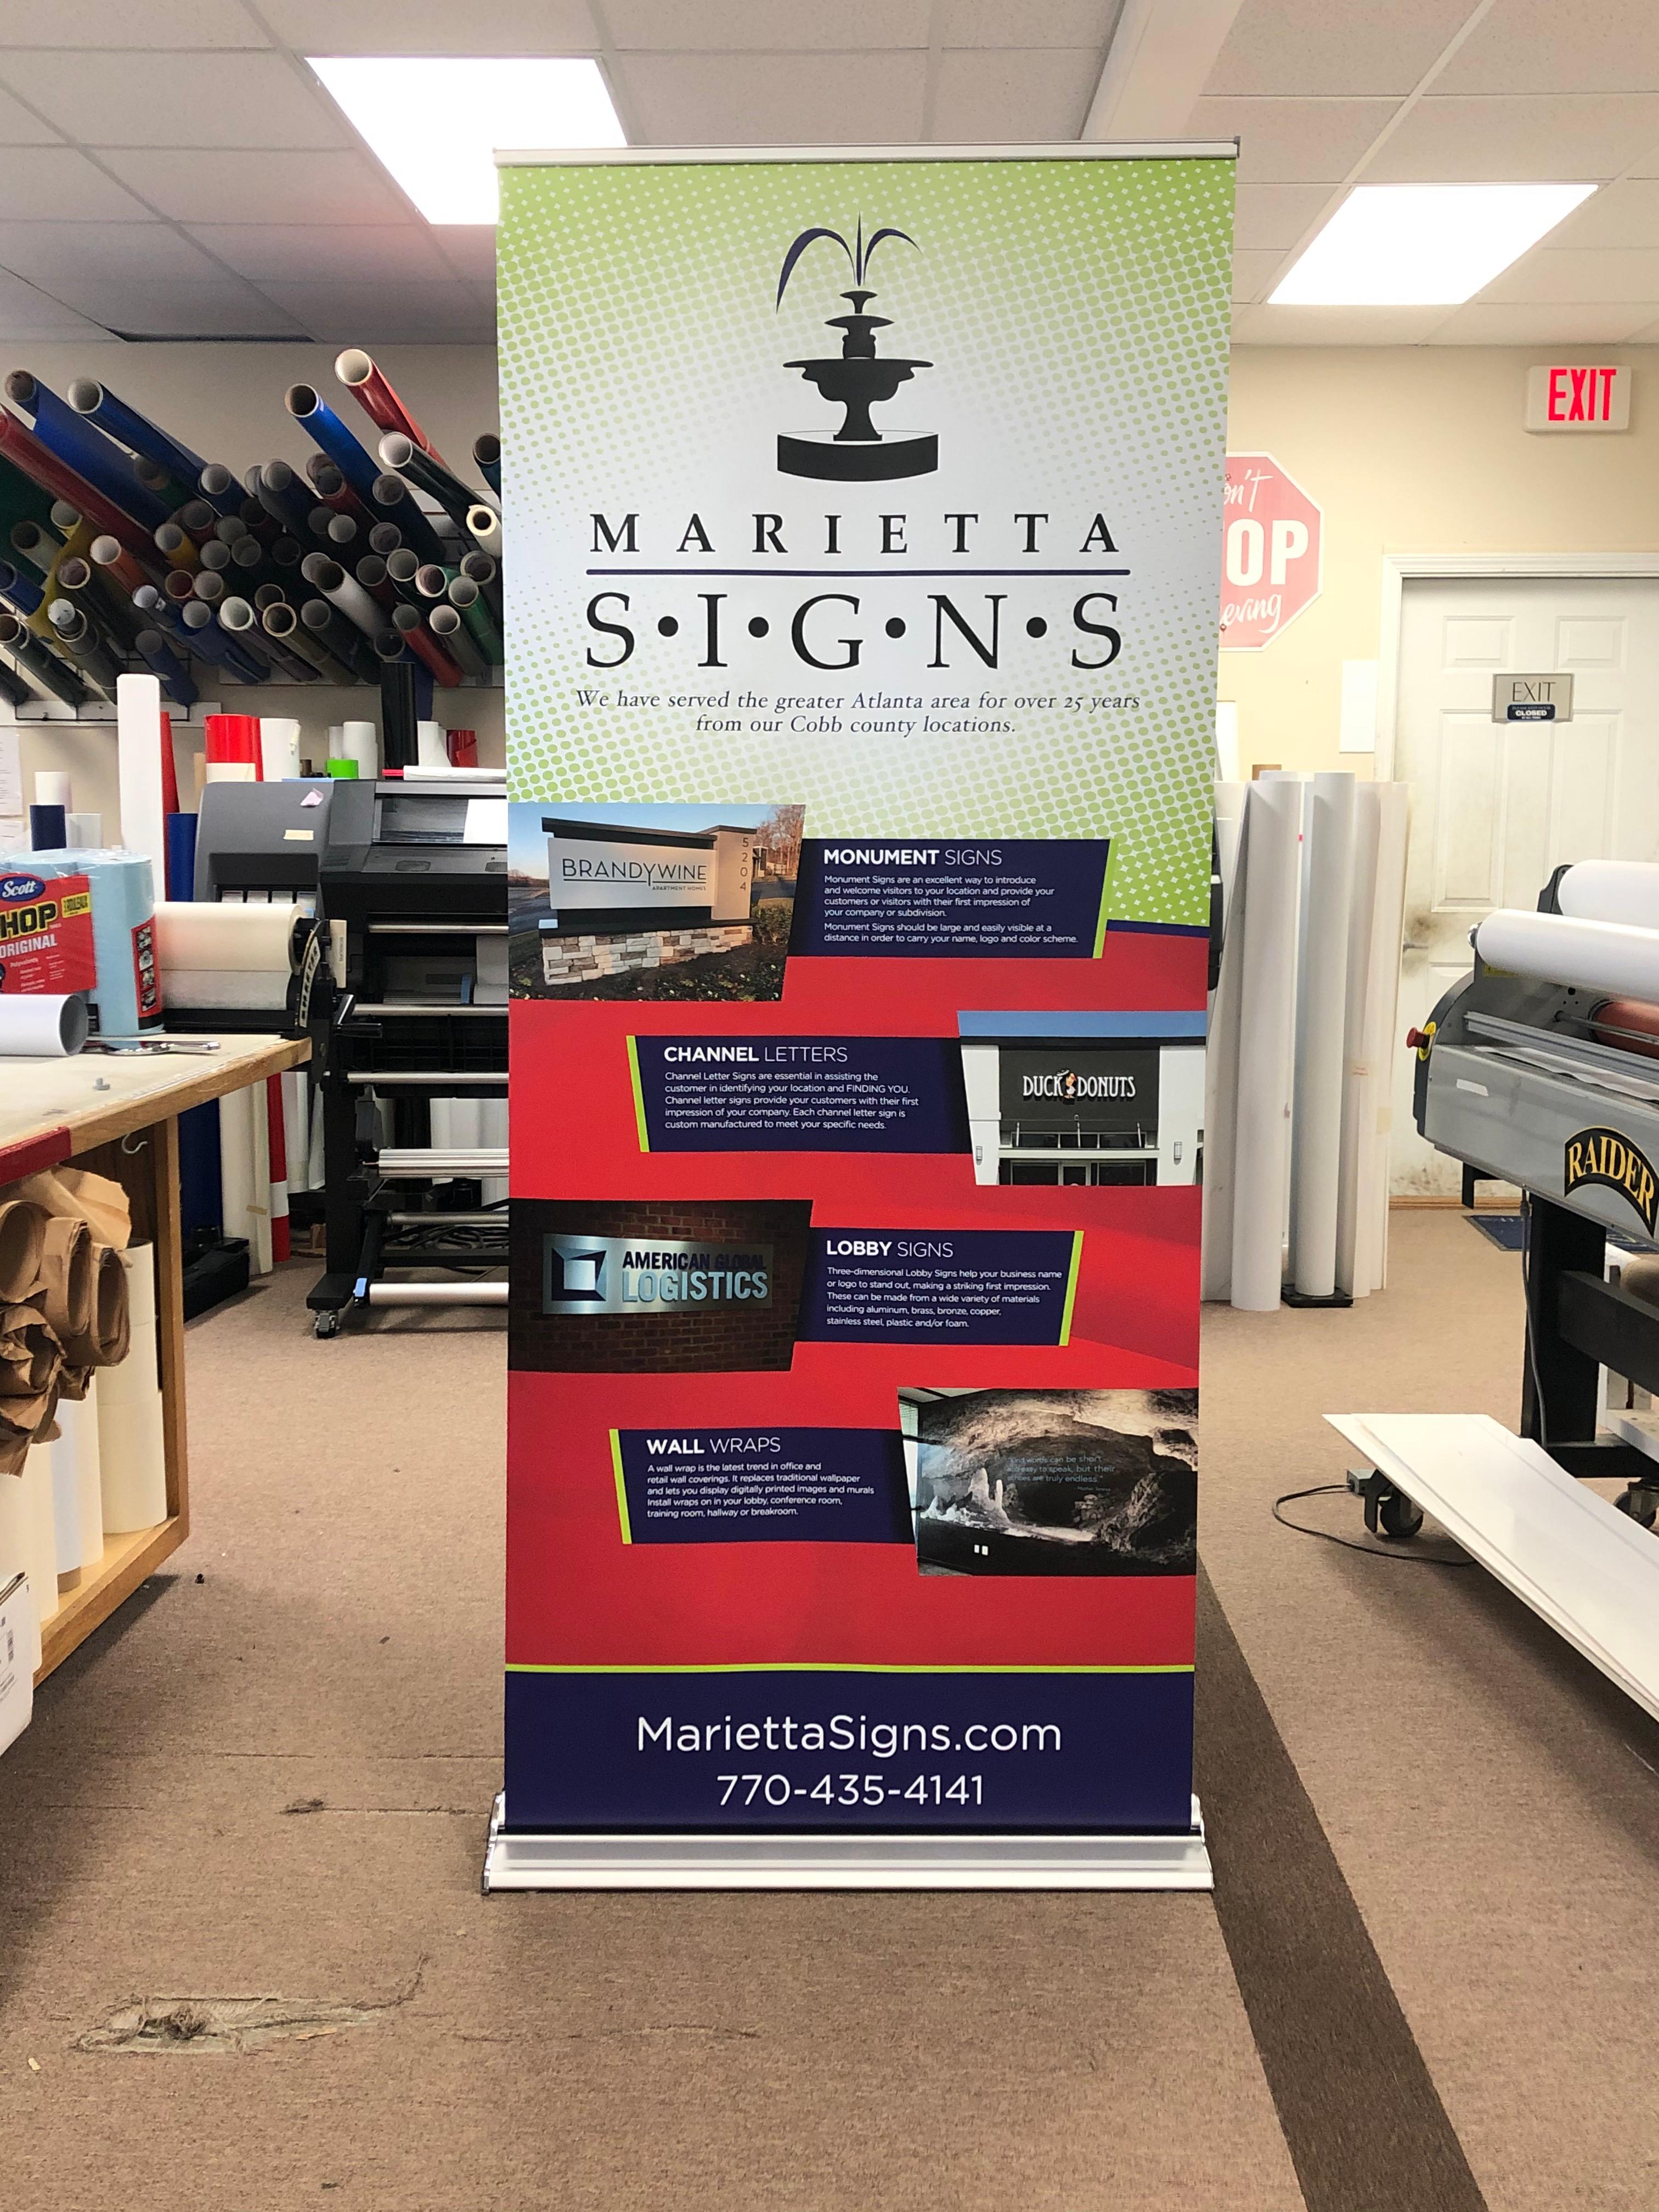 Trade Show Displays - Show Off Your Company